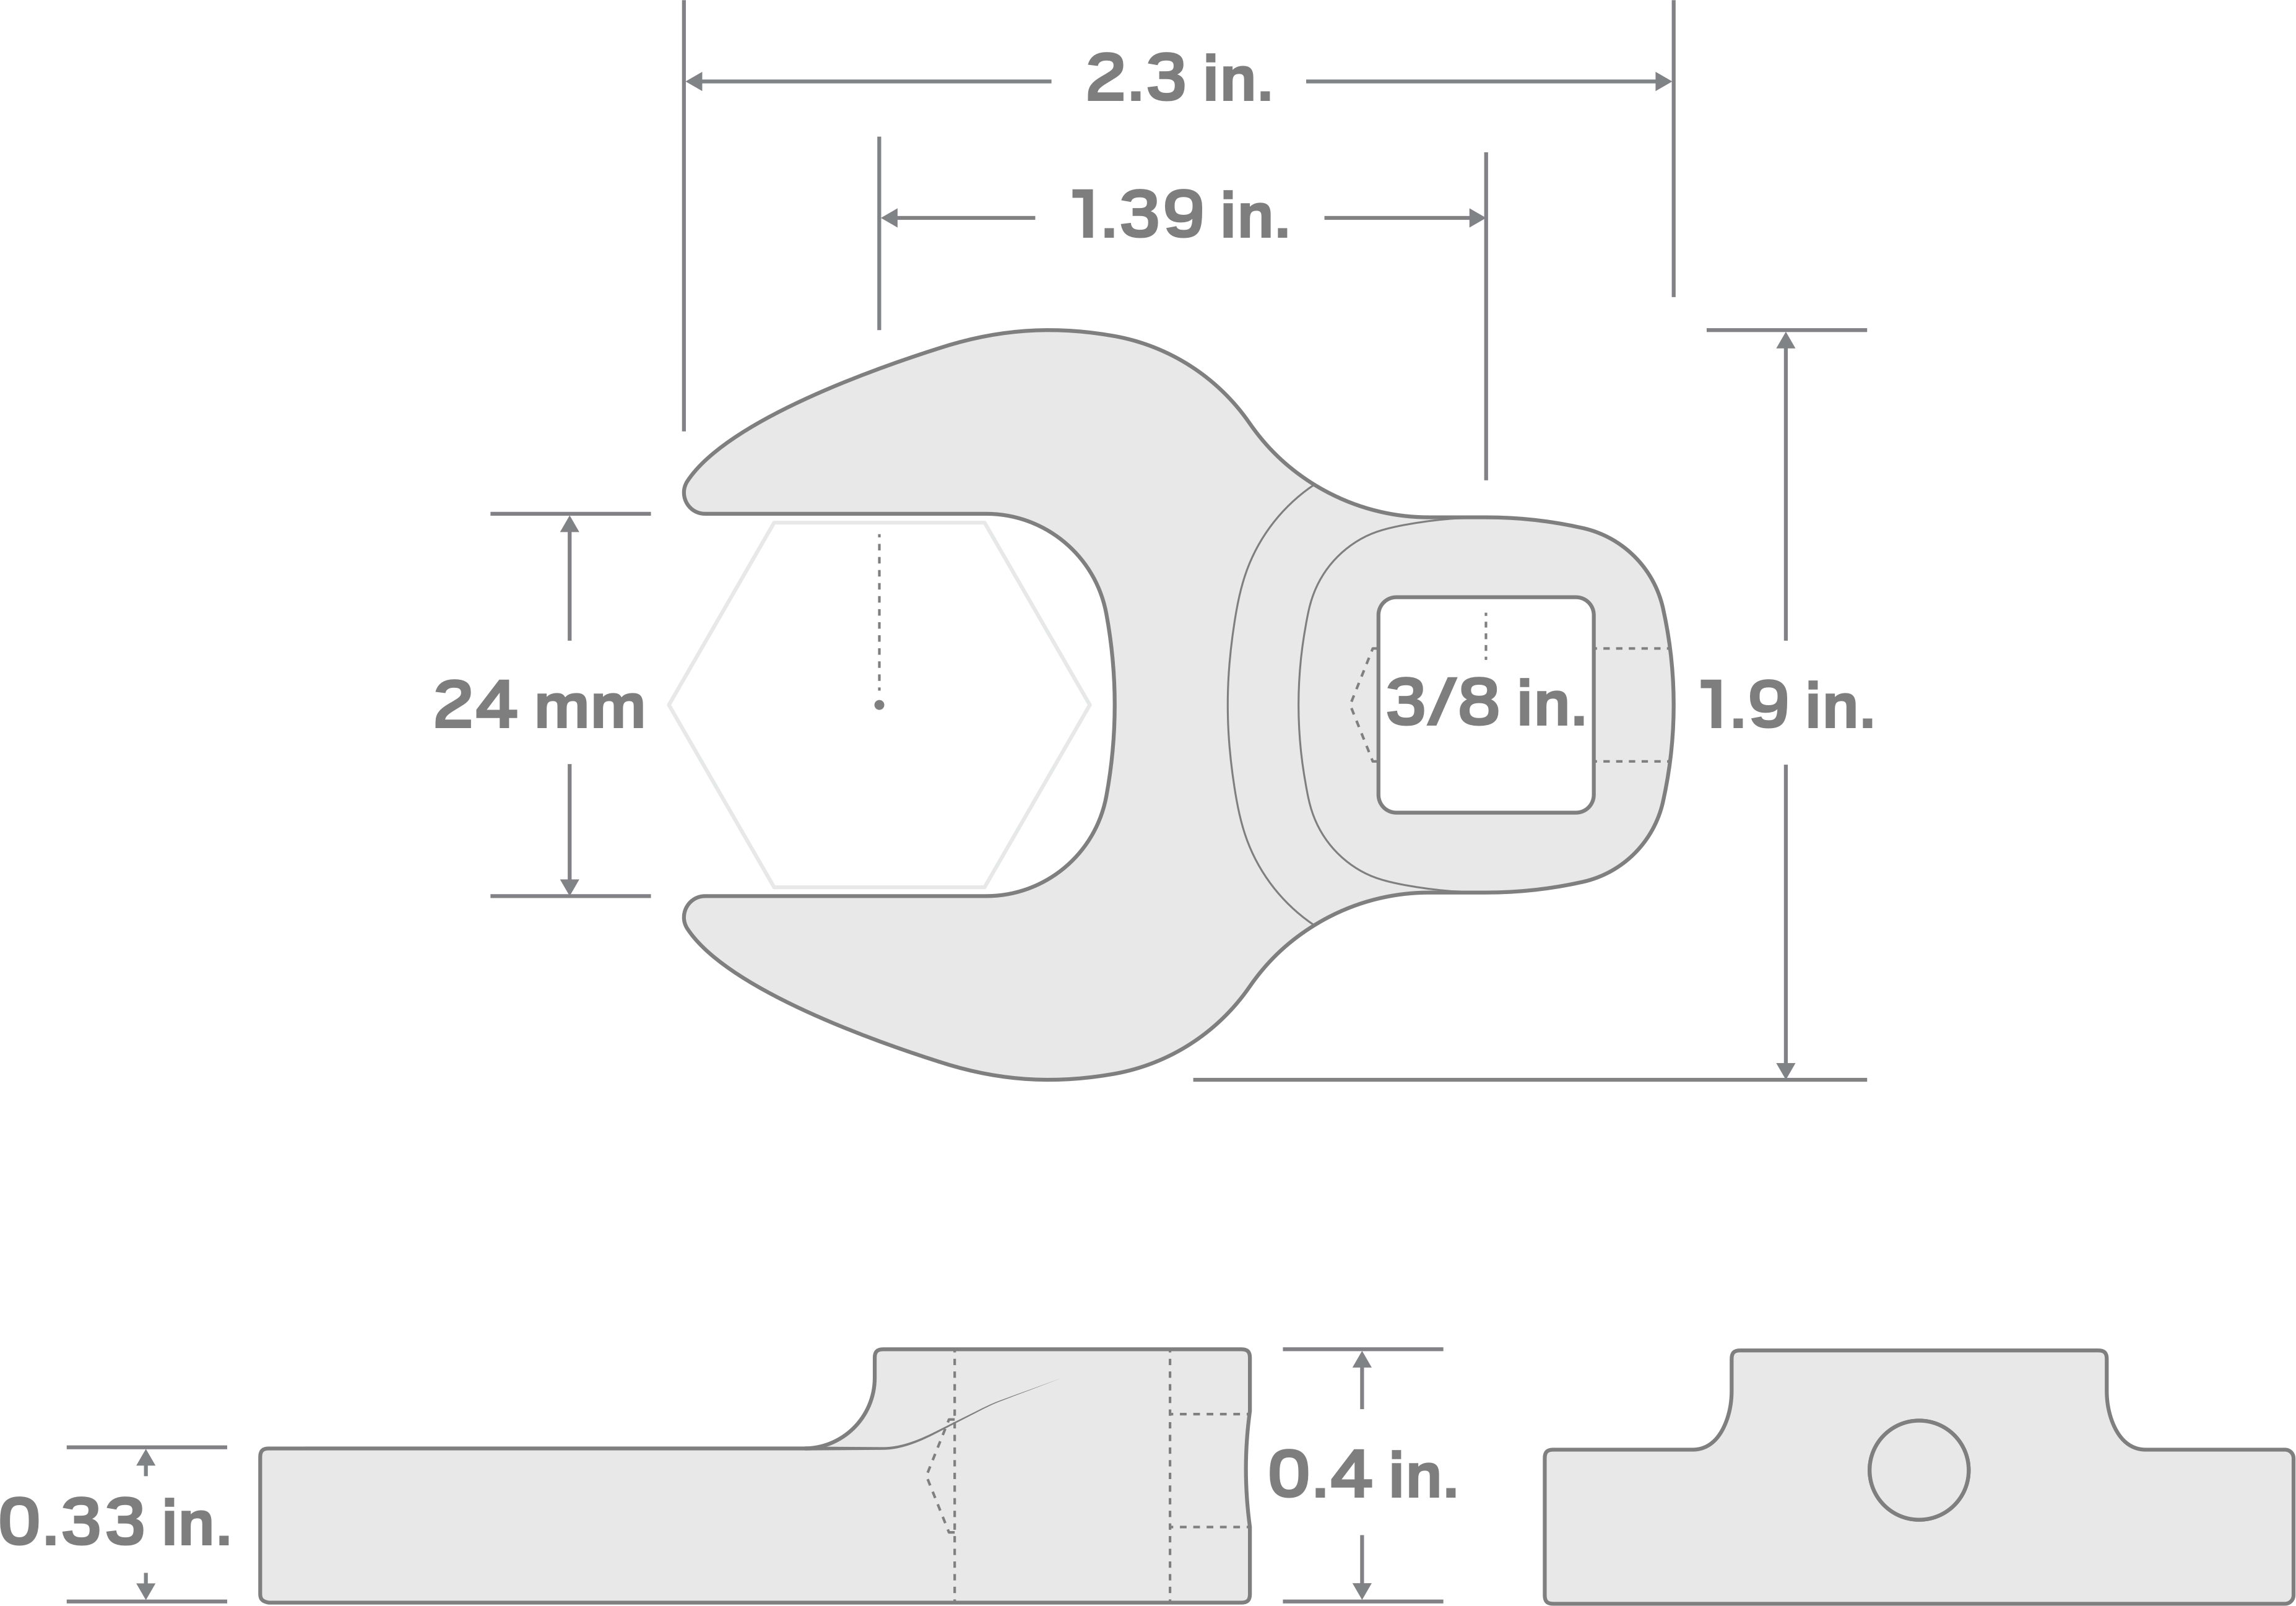 Specs for 3/8 Inch Drive x 24 mm Crowfoot Wrench